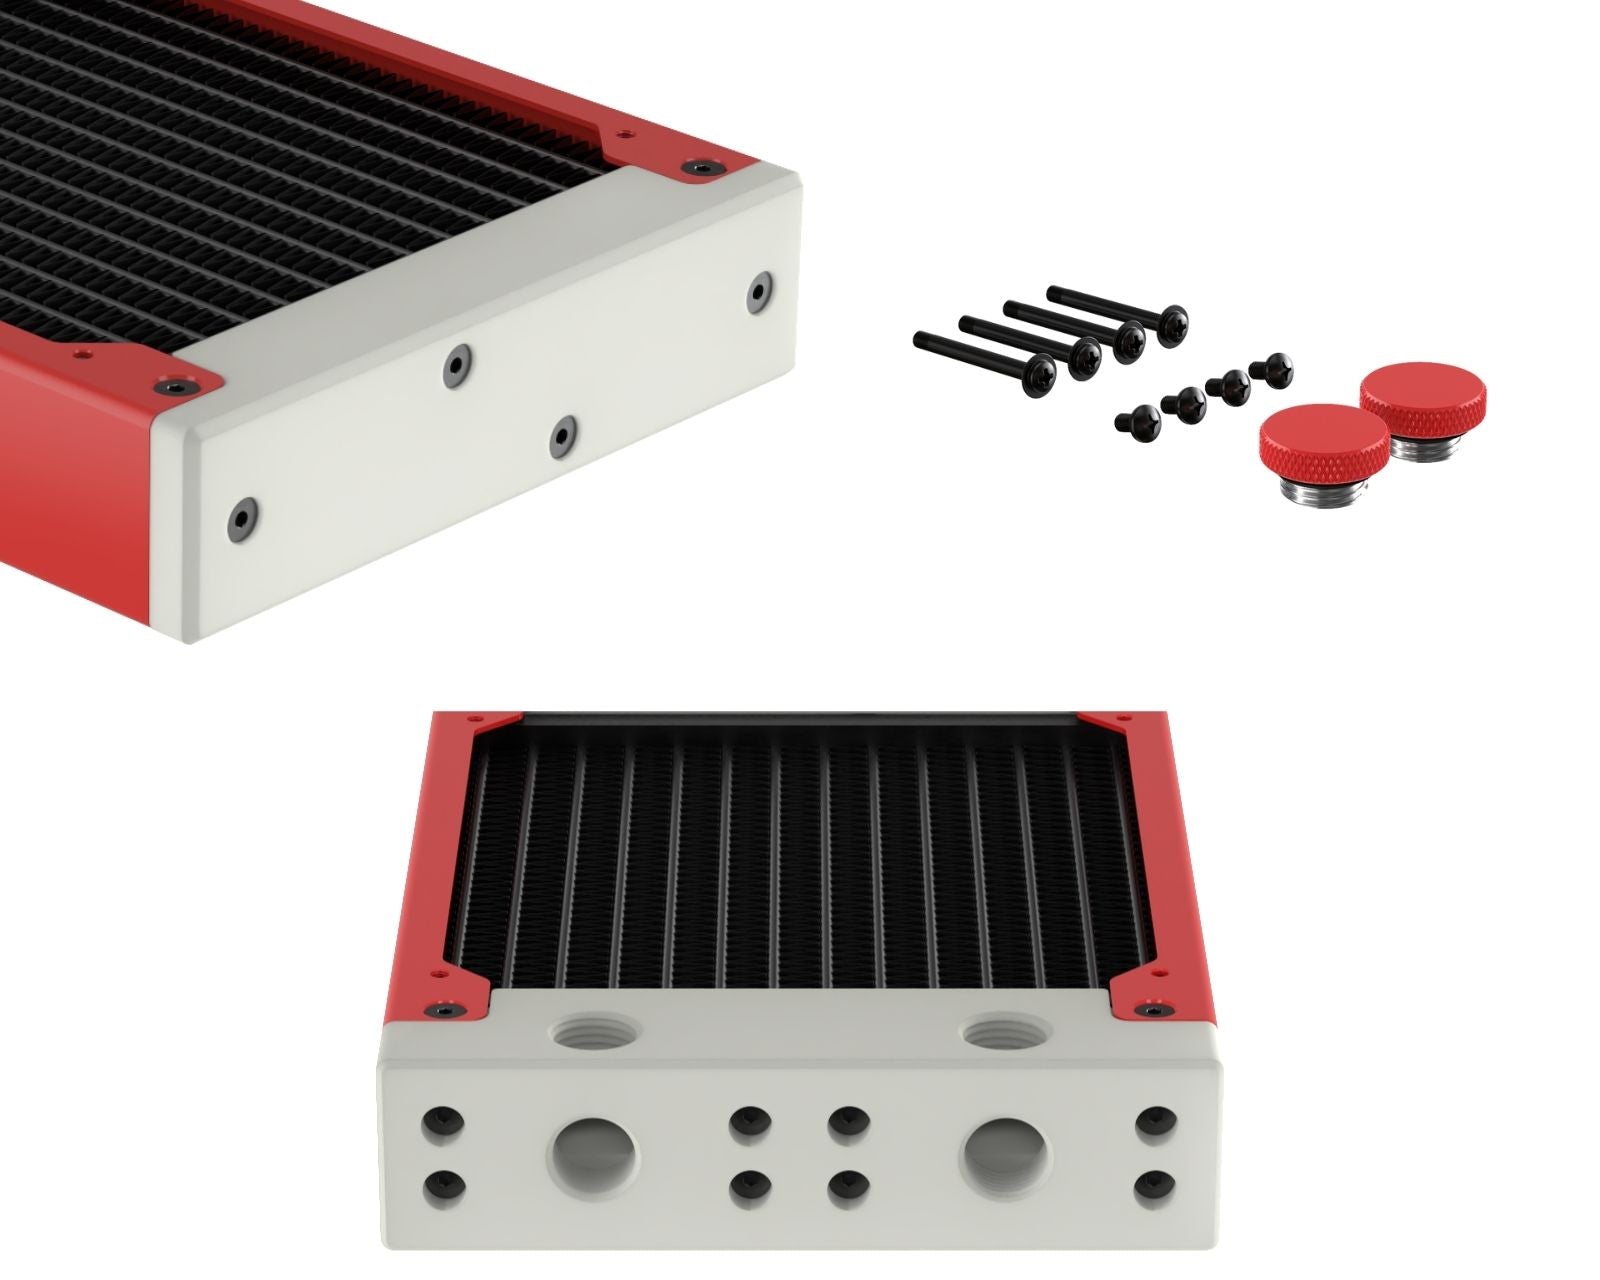 PrimoChill 120SL (30mm) EXIMO Modular Radiator, White POM, 1x120mm, Single Fan (R-SL-W12) Available in 20+ Colors, Assembled in USA and Custom Watercooling Loop Ready - Razor Red